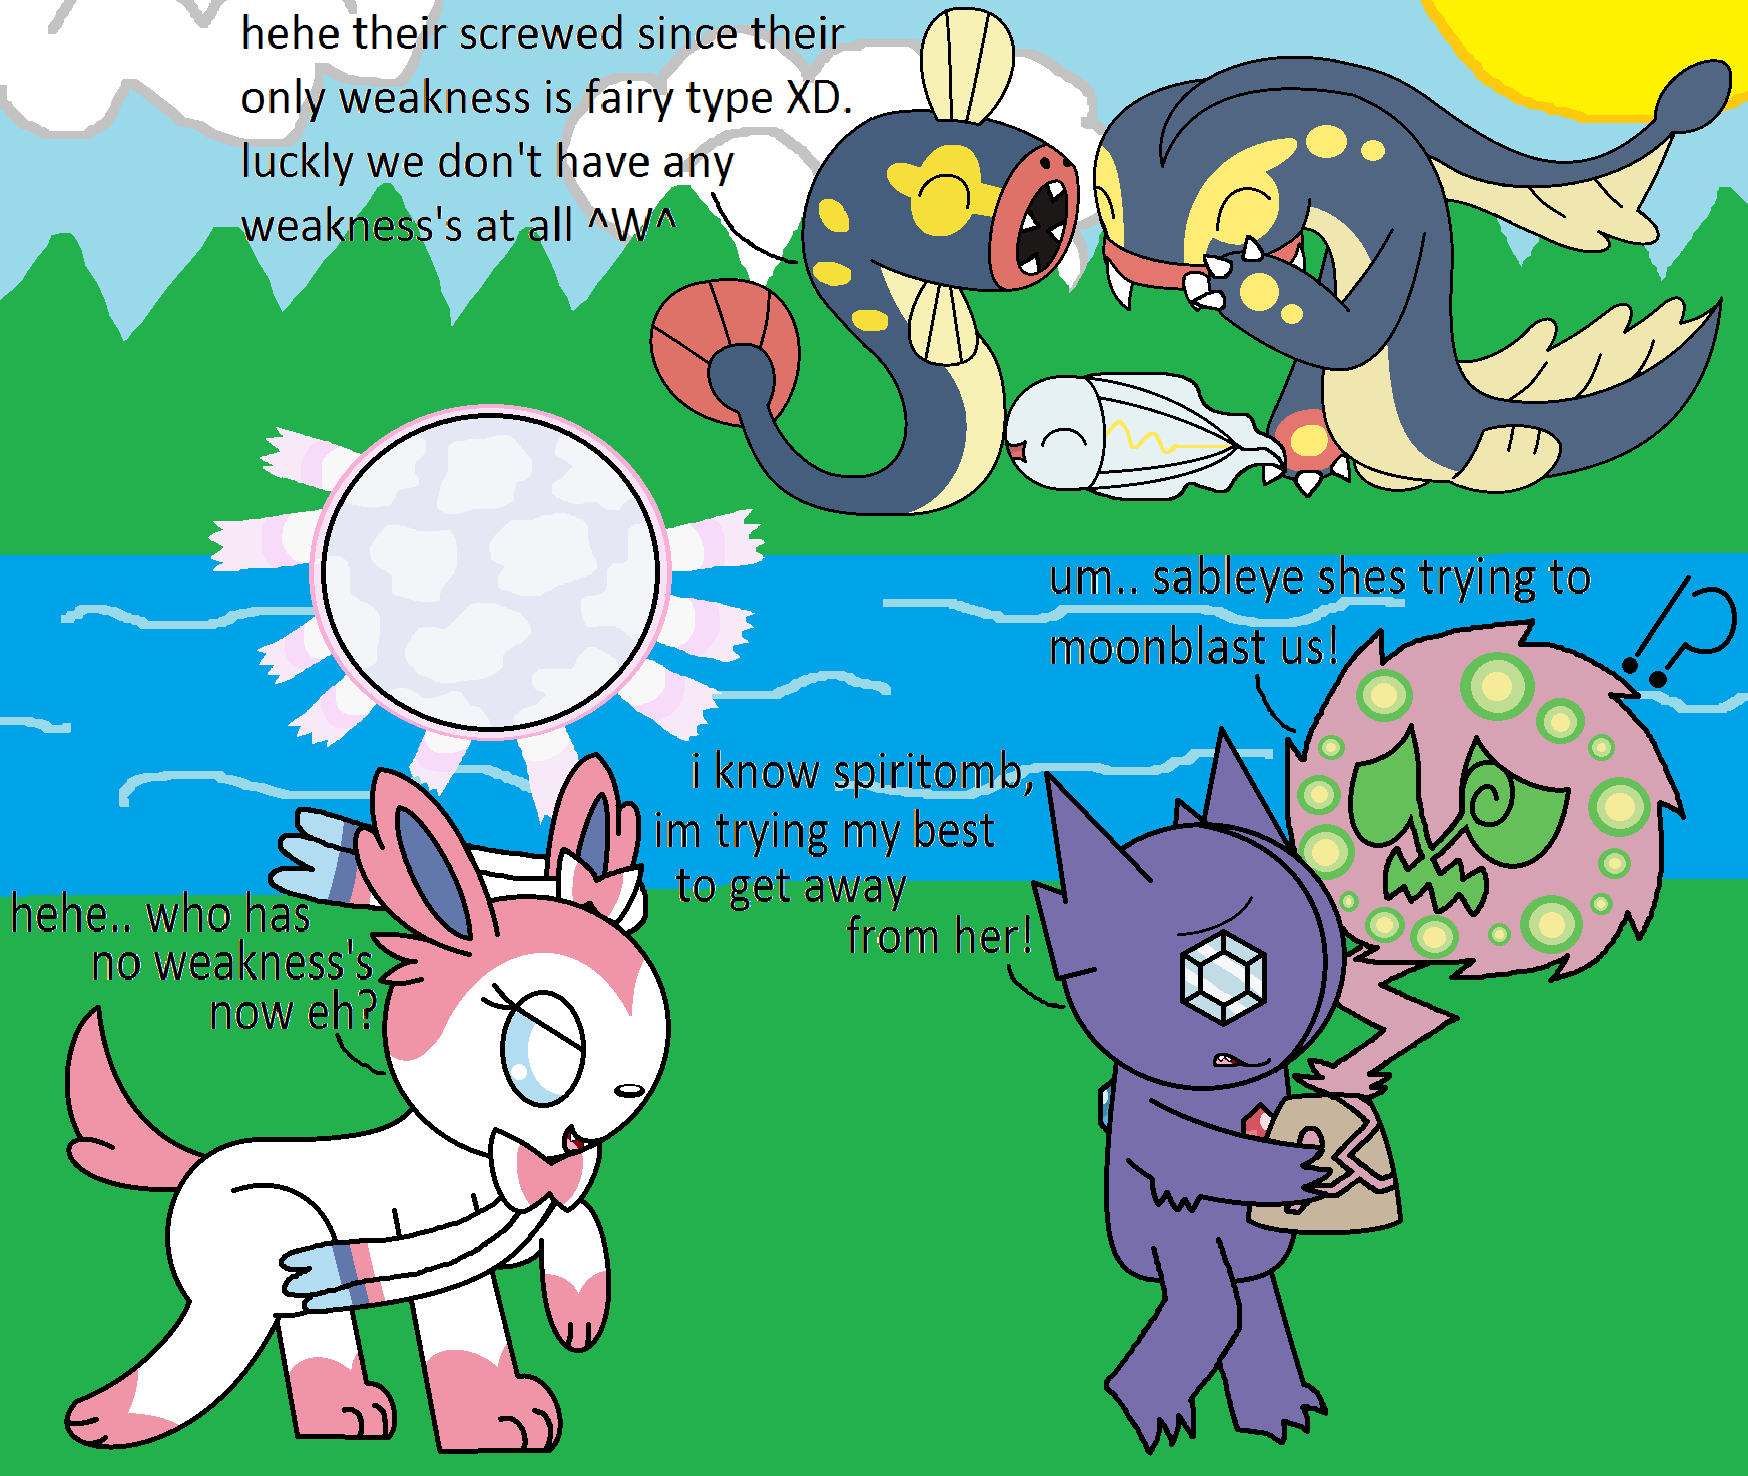 Sableye And Spiritomb Their Only Weakness by pokemonlpsfan on DeviantArt